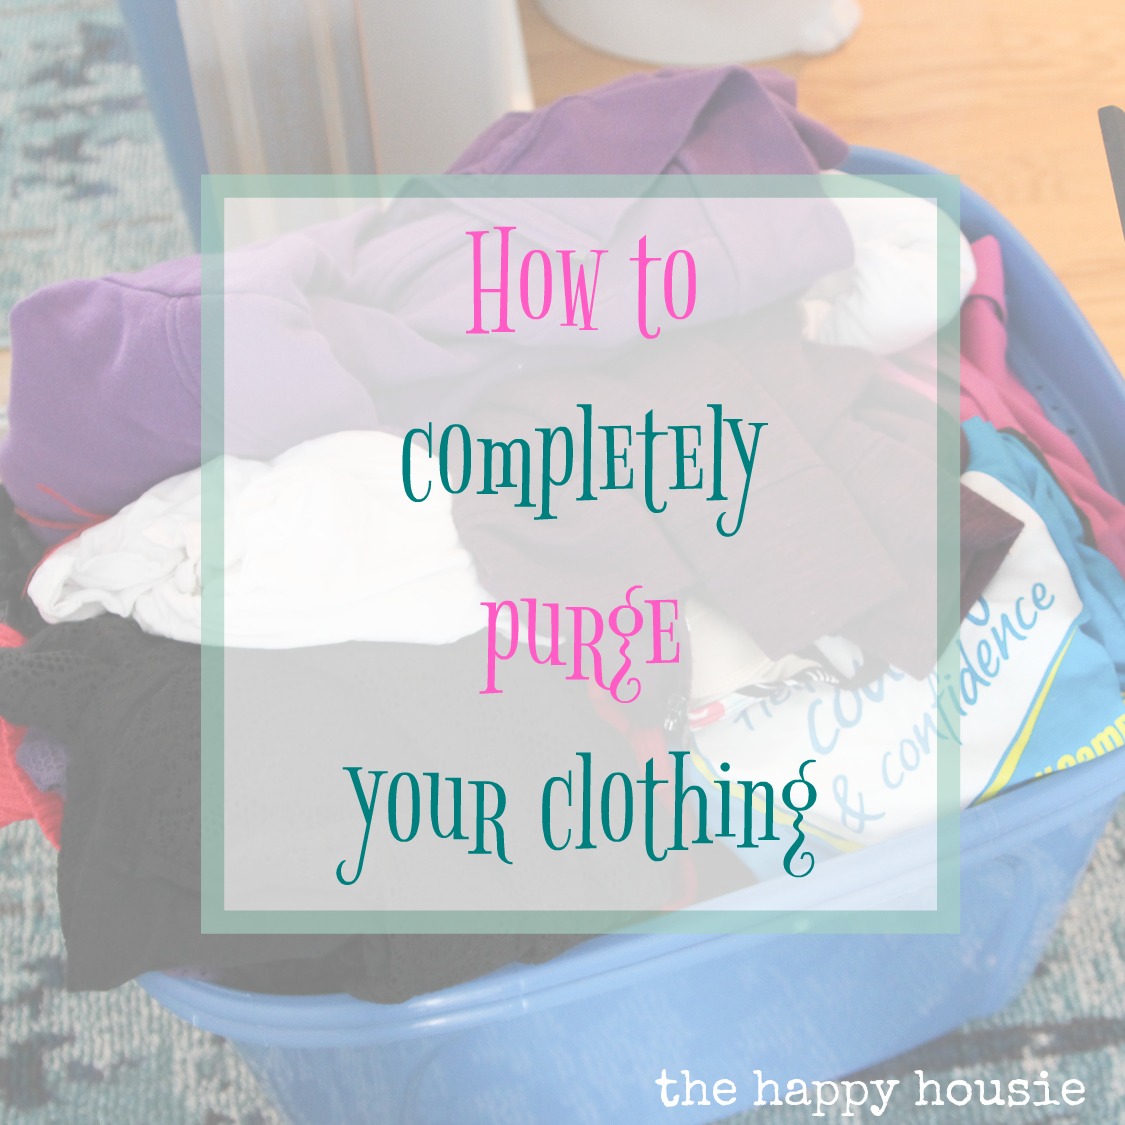 How to completely purge your clothing graphic.